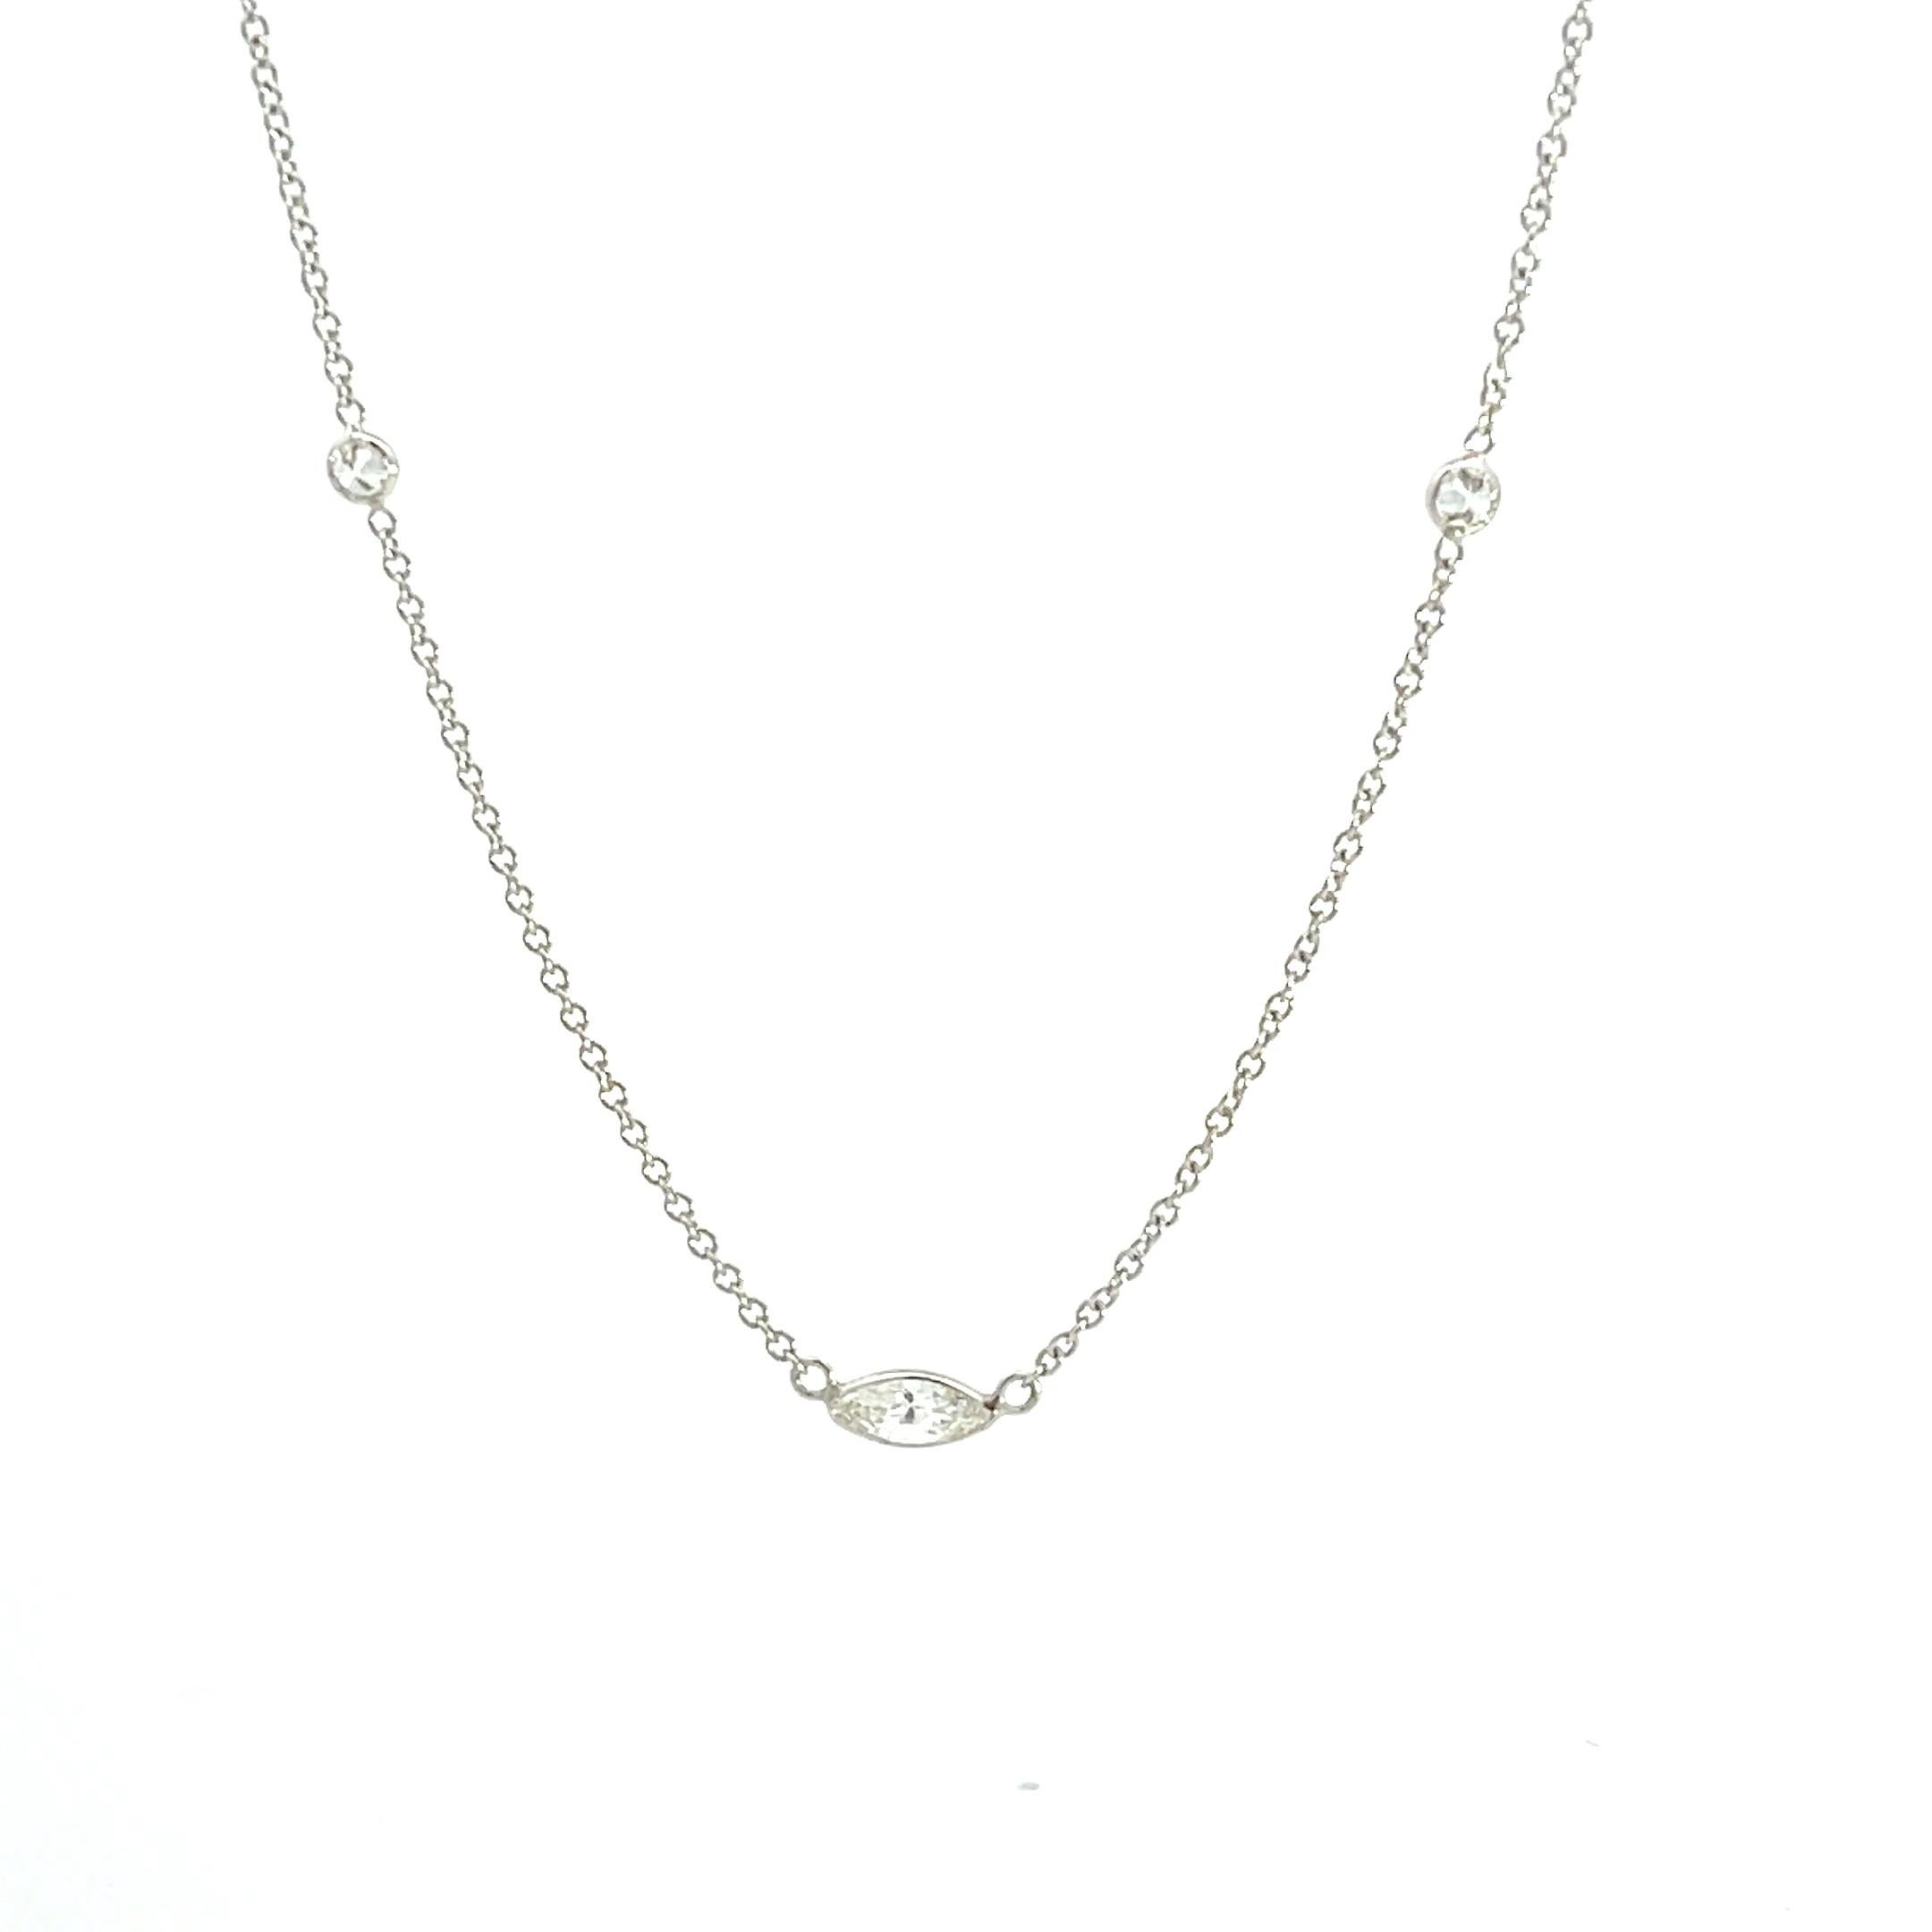 Elevate your style with our exquisite 14K White Gold Necklace adorned with 5/8ctw dazzling Diamonds by the Yard. This stunning piece exudes sophistication and elegance, perfect for both everyday wear and special occasions. The 5 station necklace